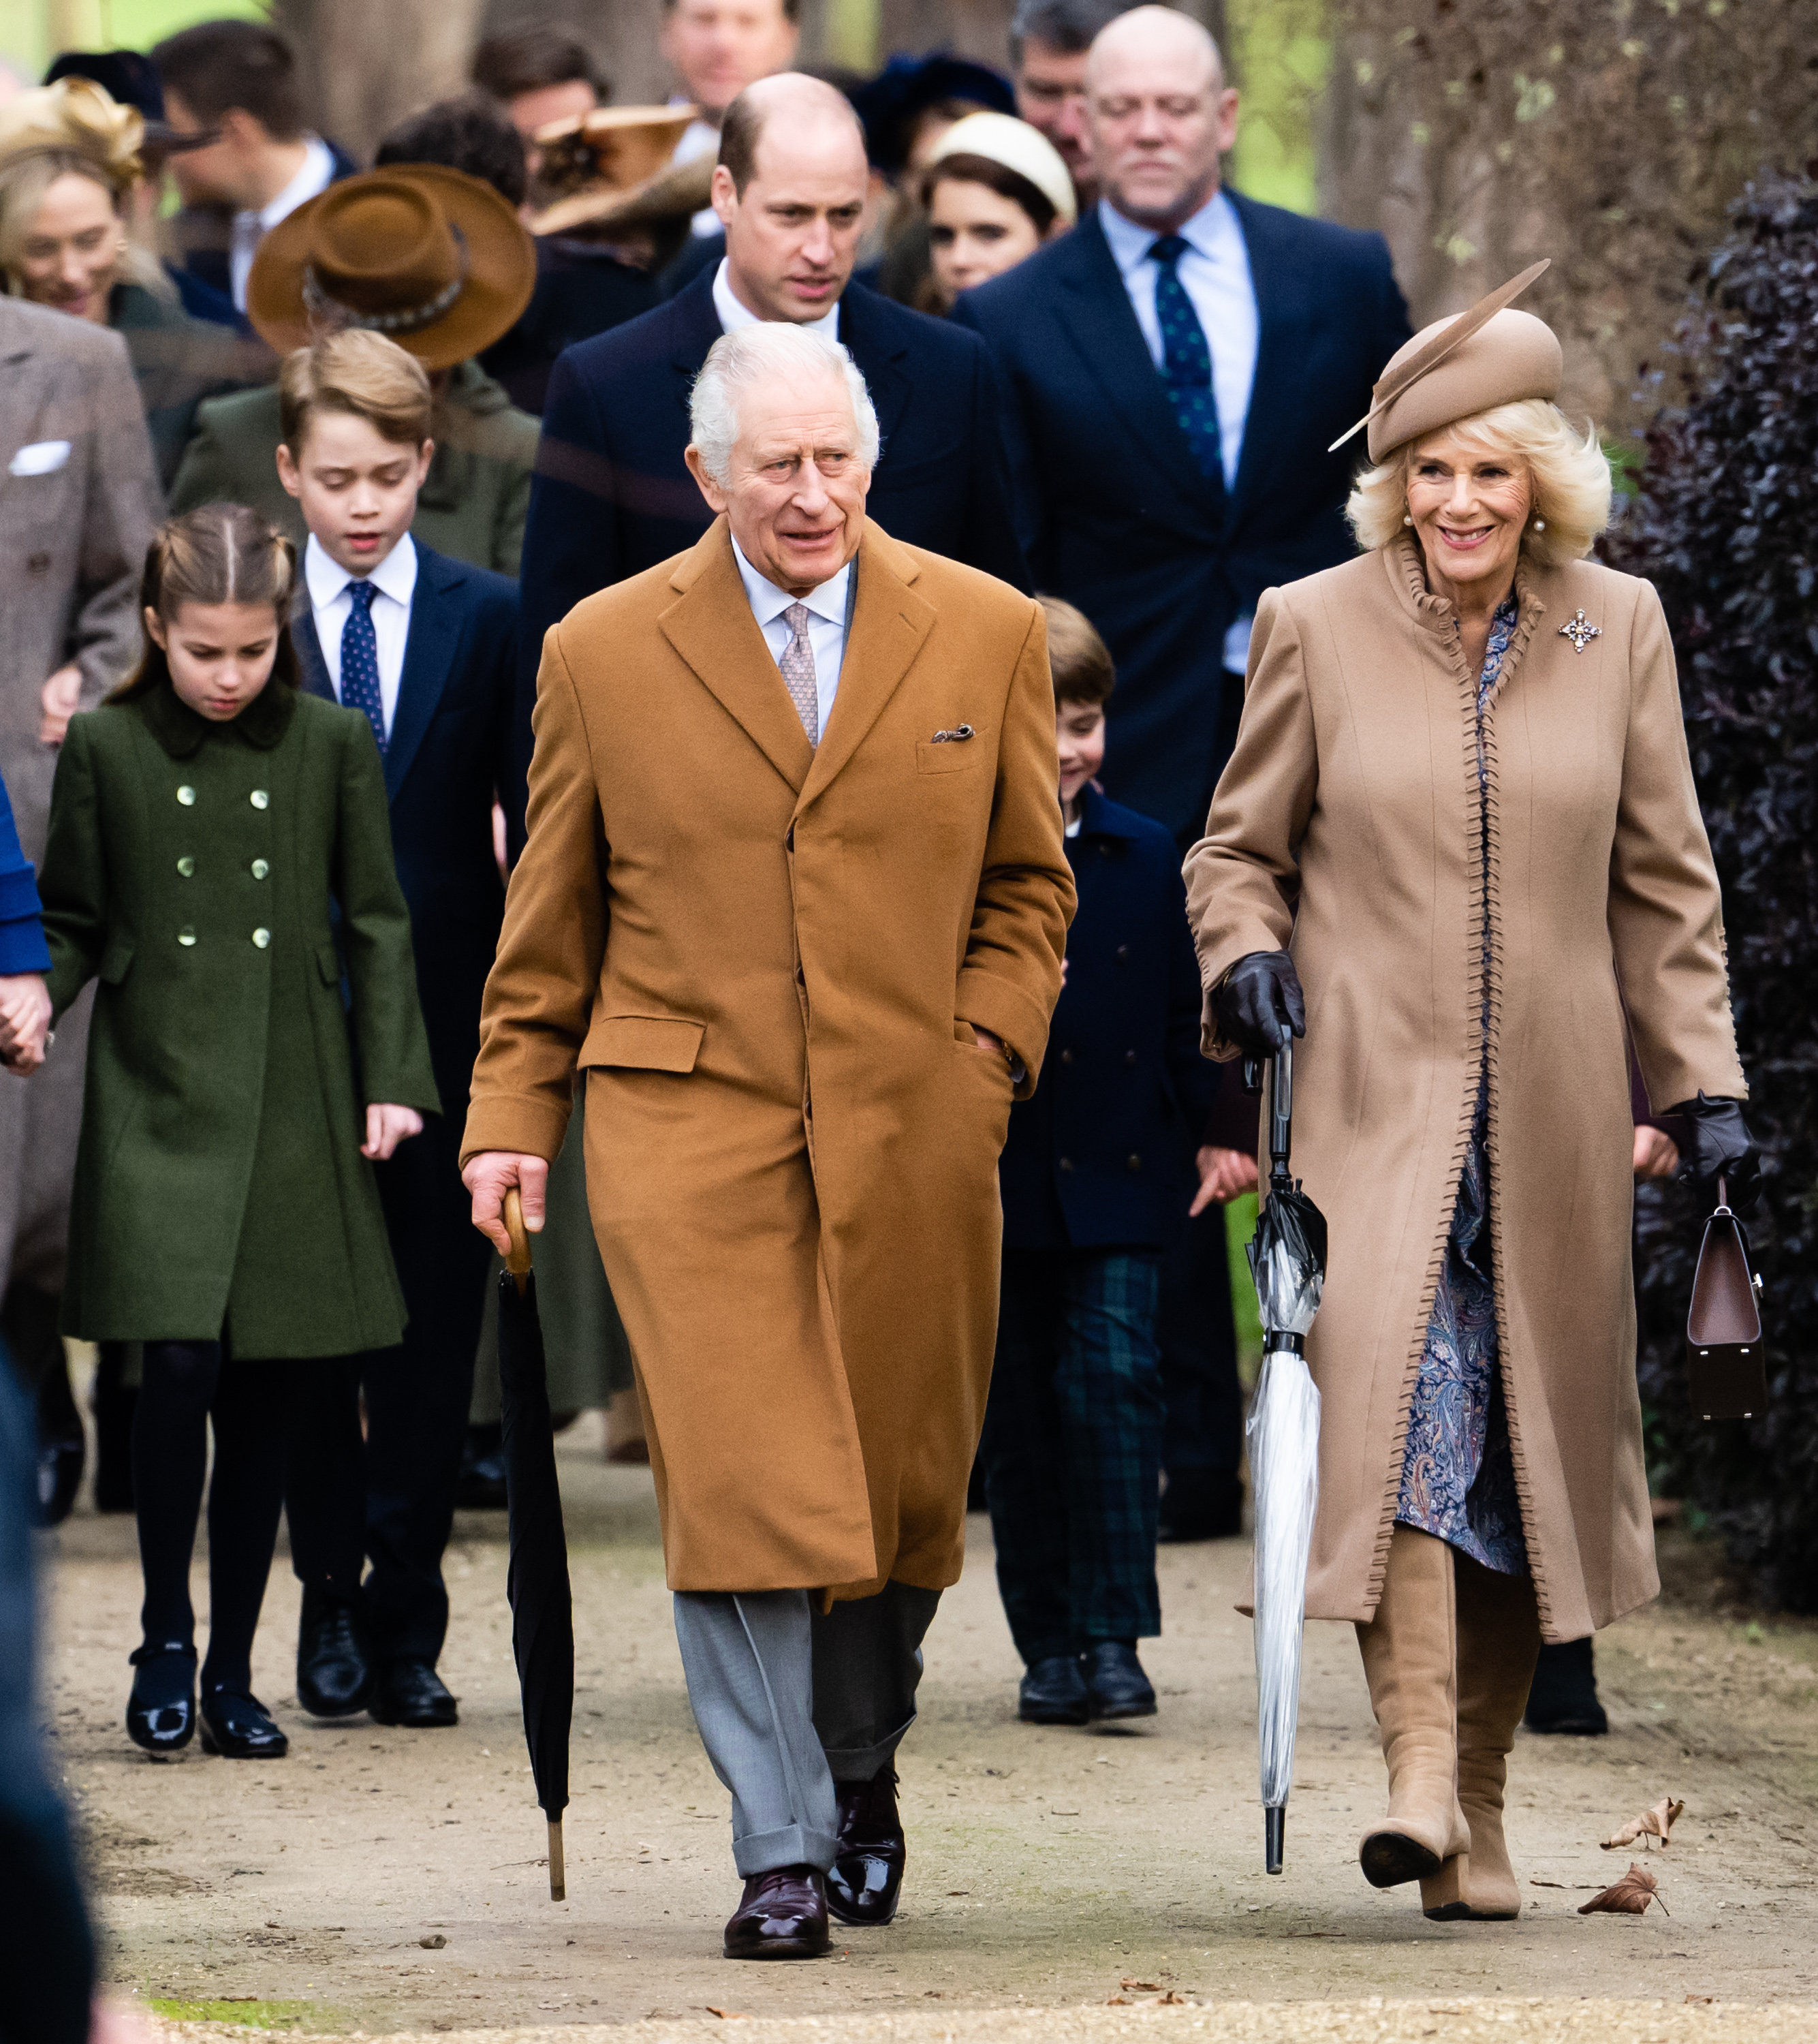 Princess Charlotte of Wales, Prince George of Wales, King Charles III, Prince William, Prince of Wales, Prince Louis of Wales, and Queen Camilla attend the Christmas Morning Service at Sandringham Church in Sandringham, Norfolk, on December 25, 2023. | Source: Getty Images